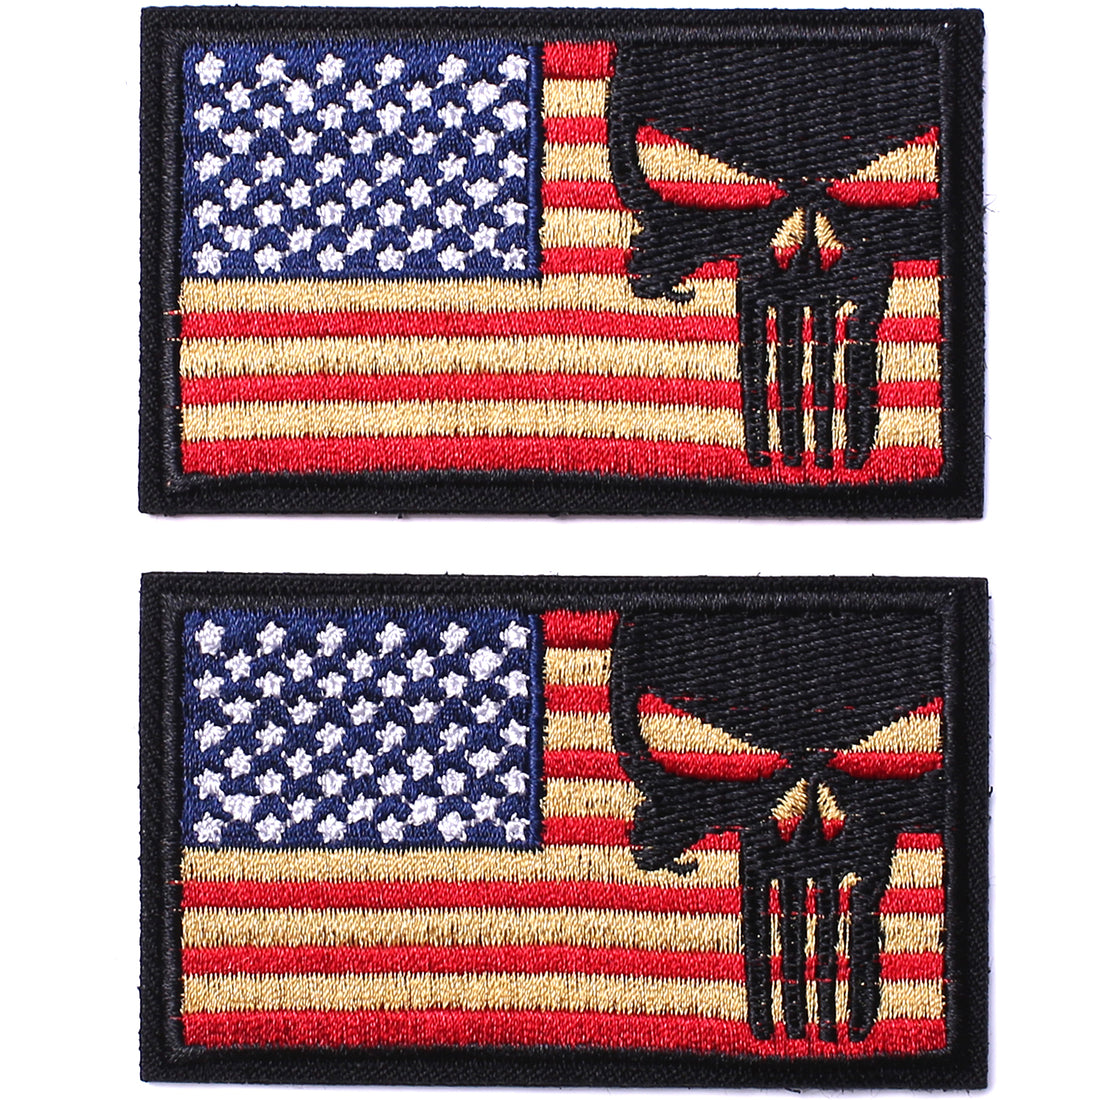 2 Pieces Dead Skull USA American Flag Tactical Morale Hook & Loop Patch, Gold Stars